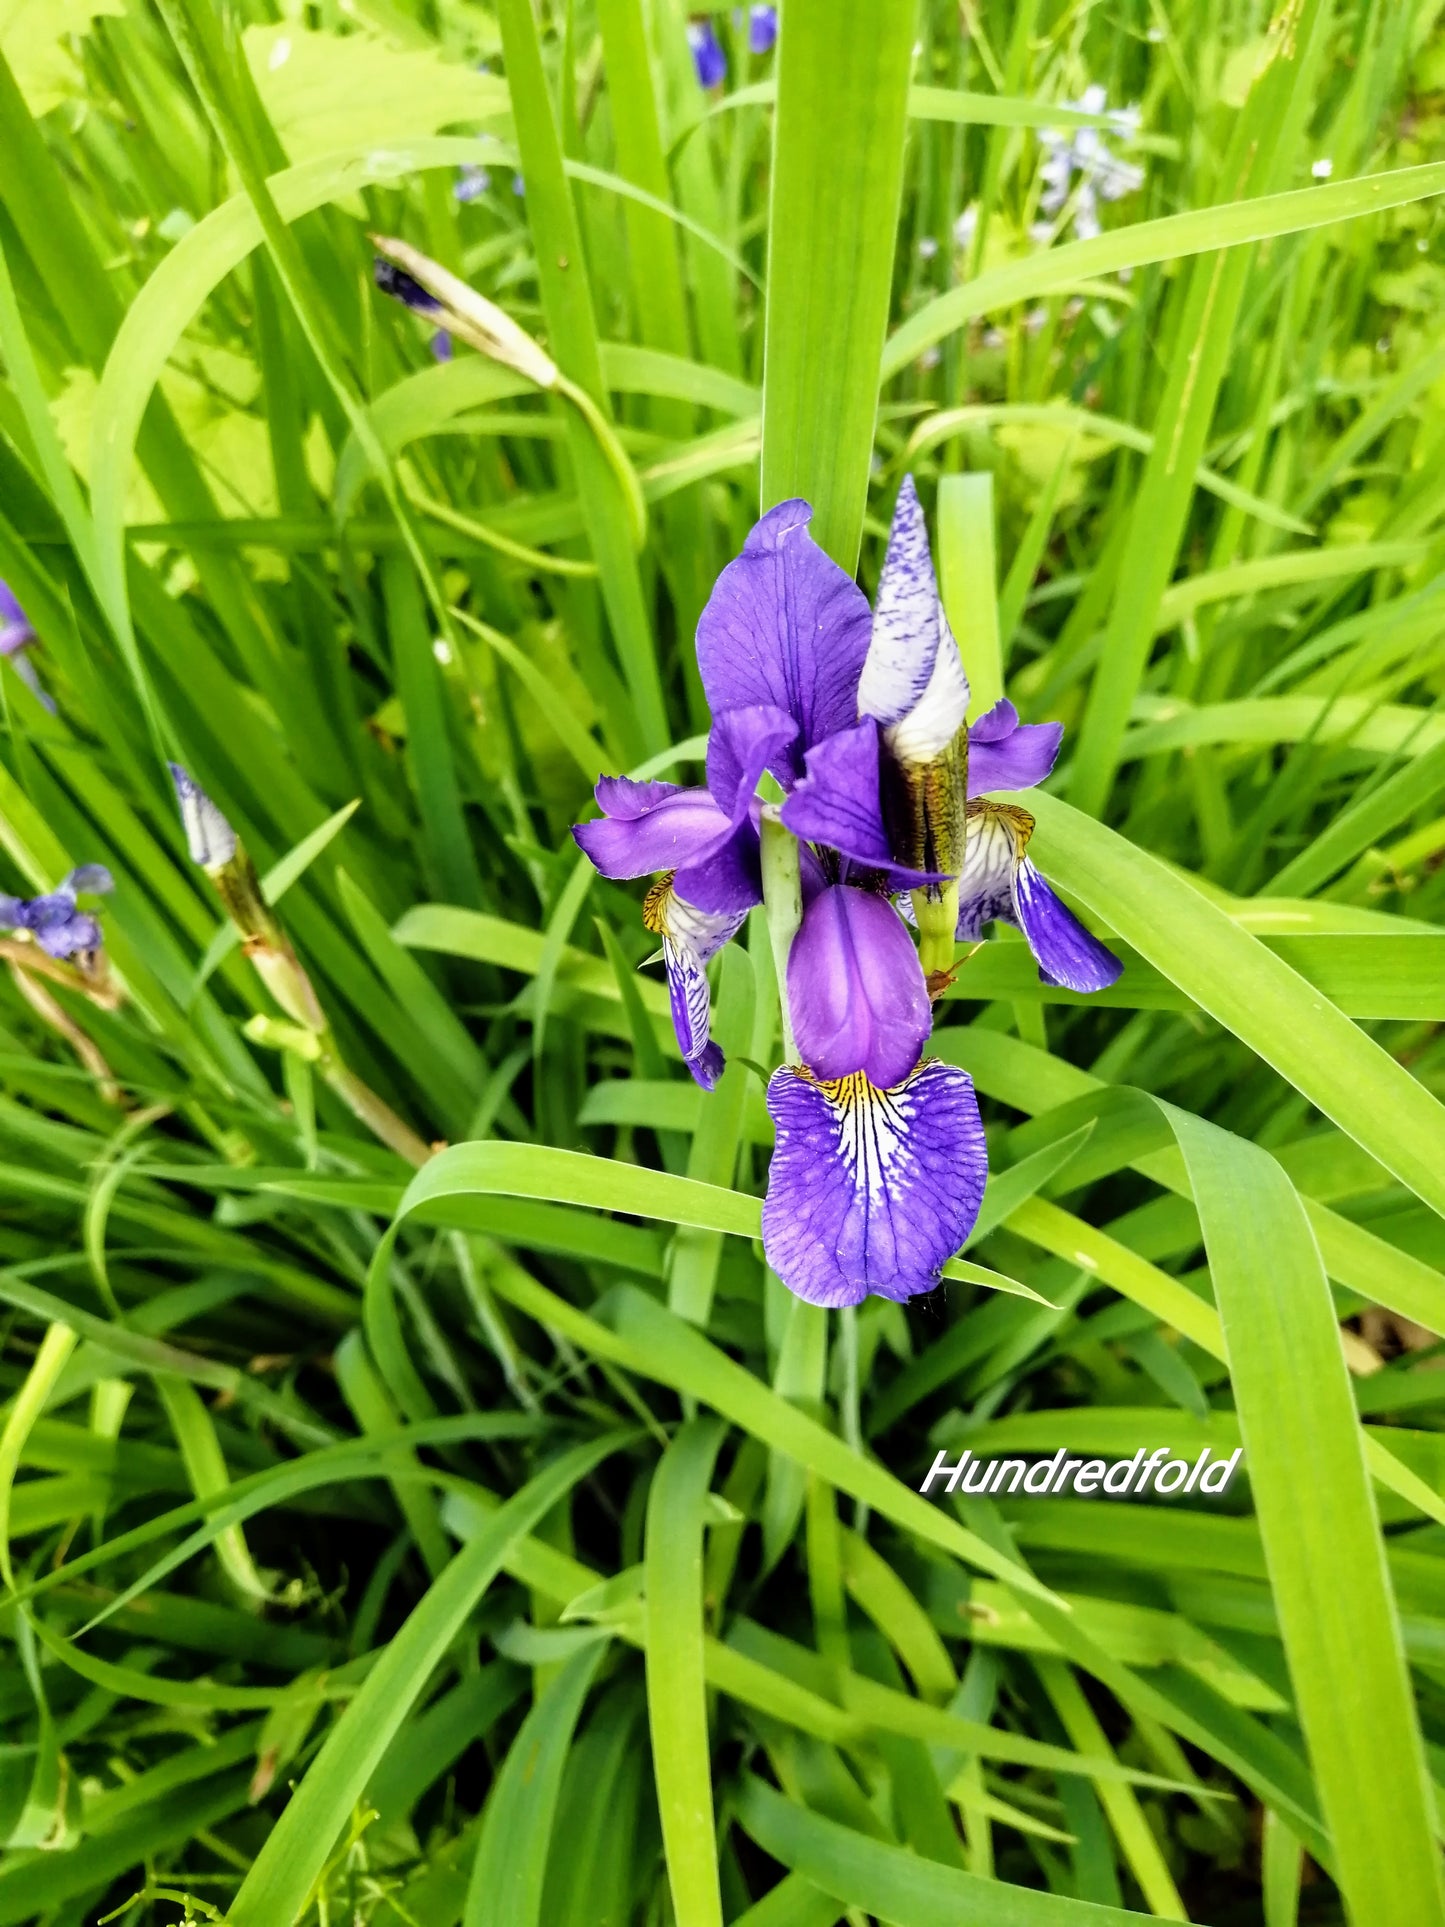 Hundredfold 20 Blue Flag Iris Wildflower Seeds – Iris versicolor Canada Native Flower, Large Blue Iris, Northern Blueflag, Excellent for Ponds and Bogs, Flower Beds and Borders